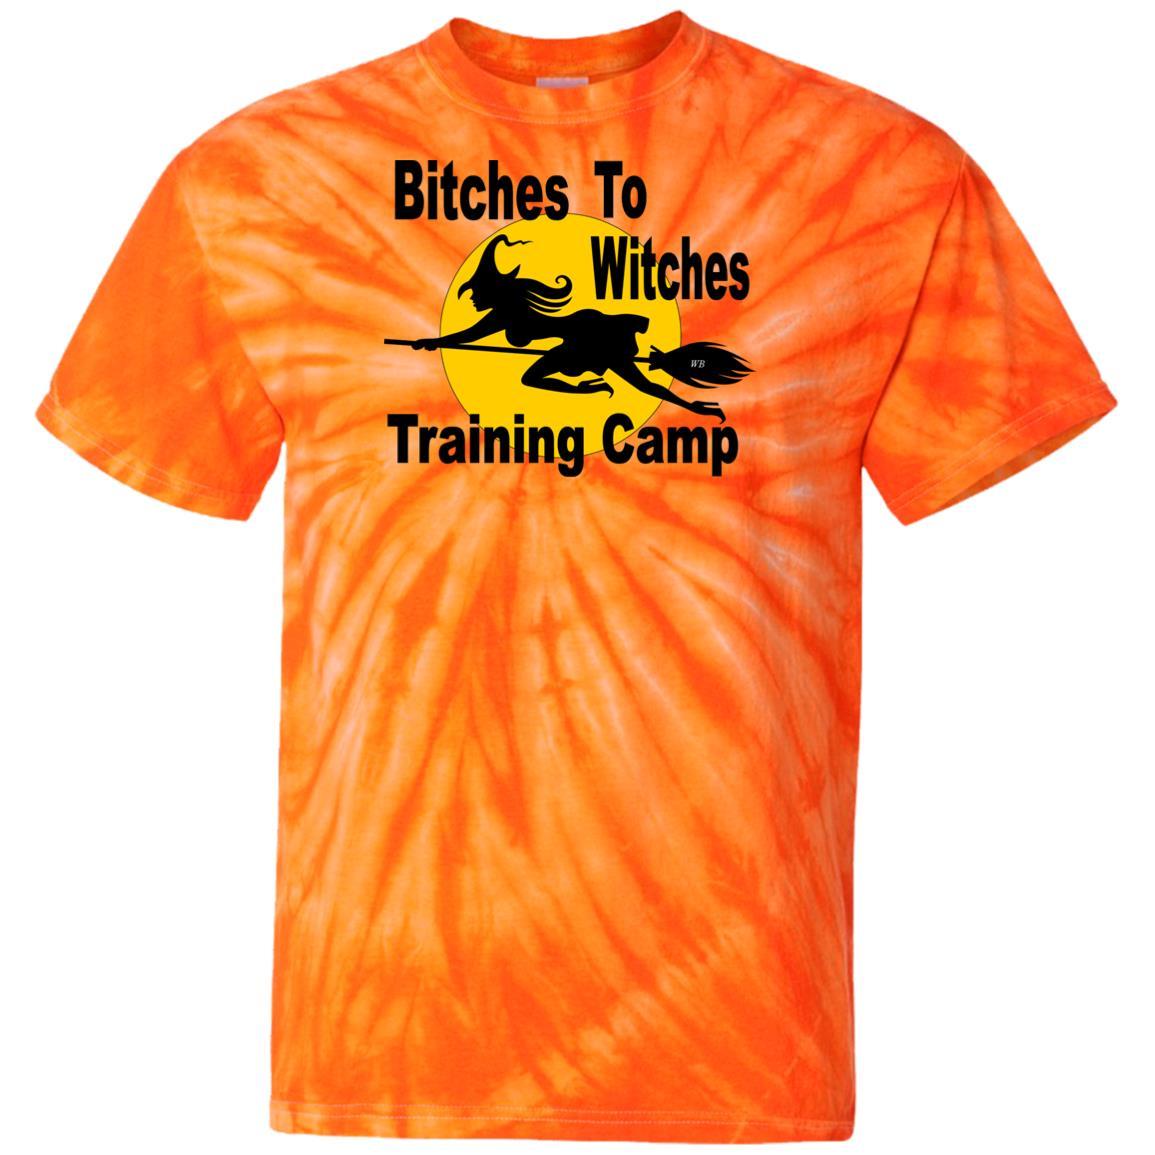 T-Shirts SpiderOrange / S WineyBitches.Co "Bitches To Witches Training Camp" - 100% Cotton Tie Dye T-Shirt WineyBitchesCo